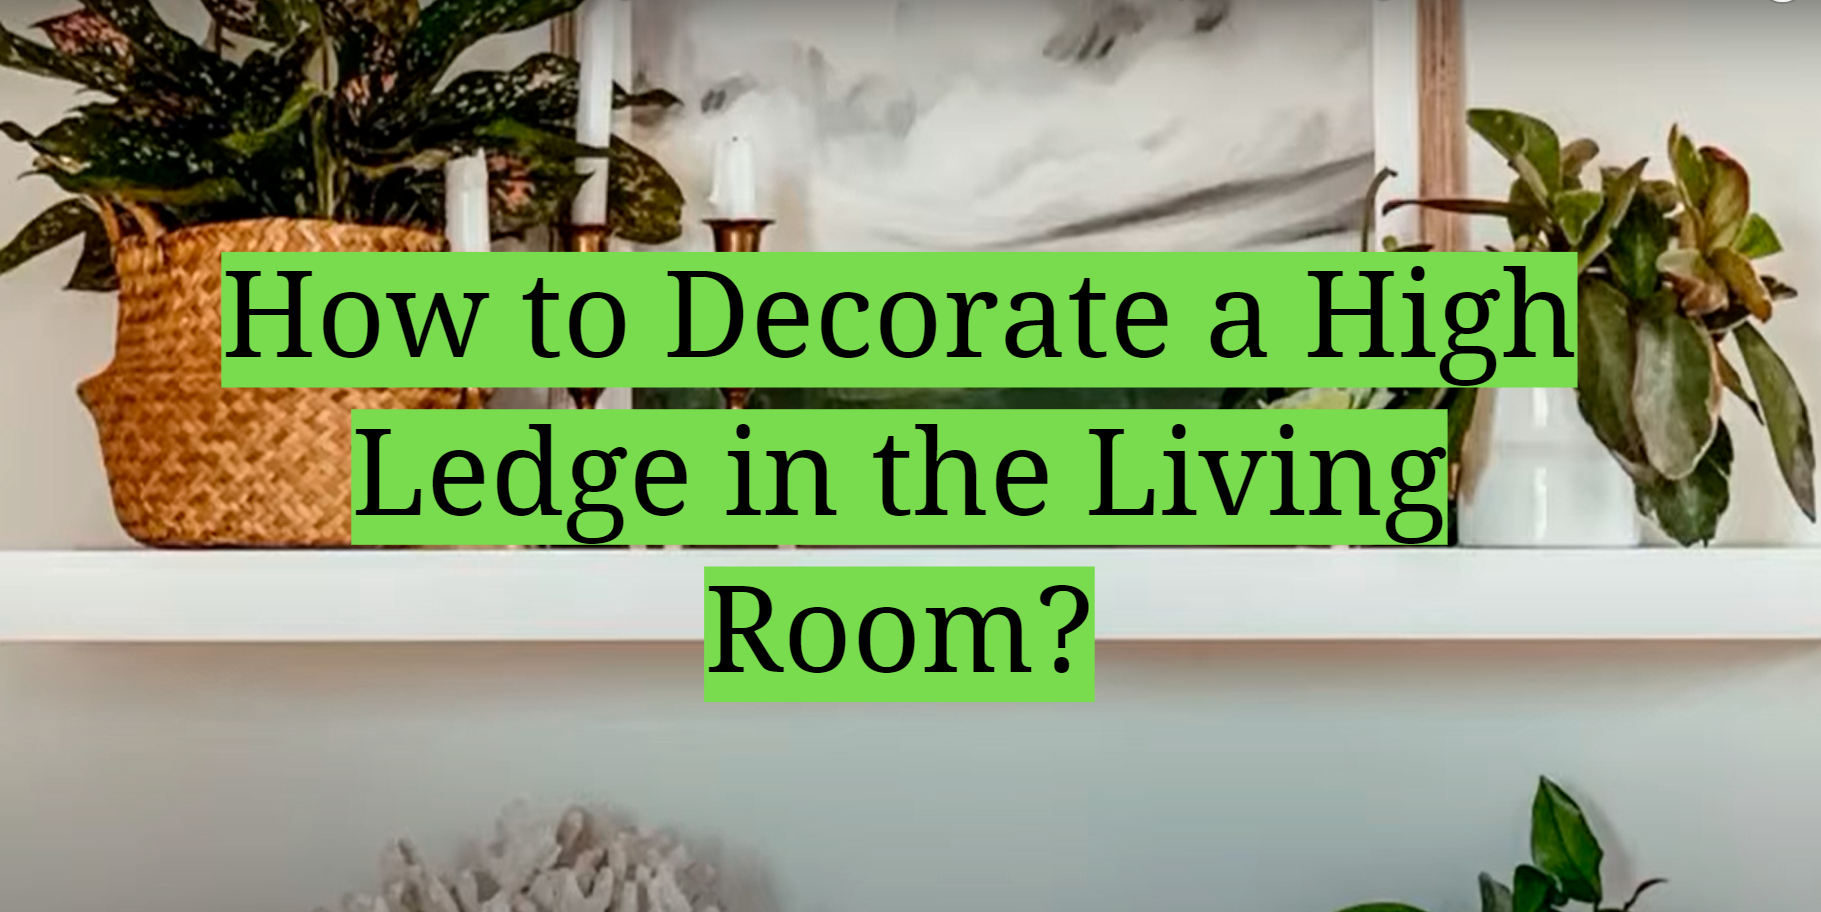 6 Ways to Decorate a High Ledge in the Living Room - HomeProfy